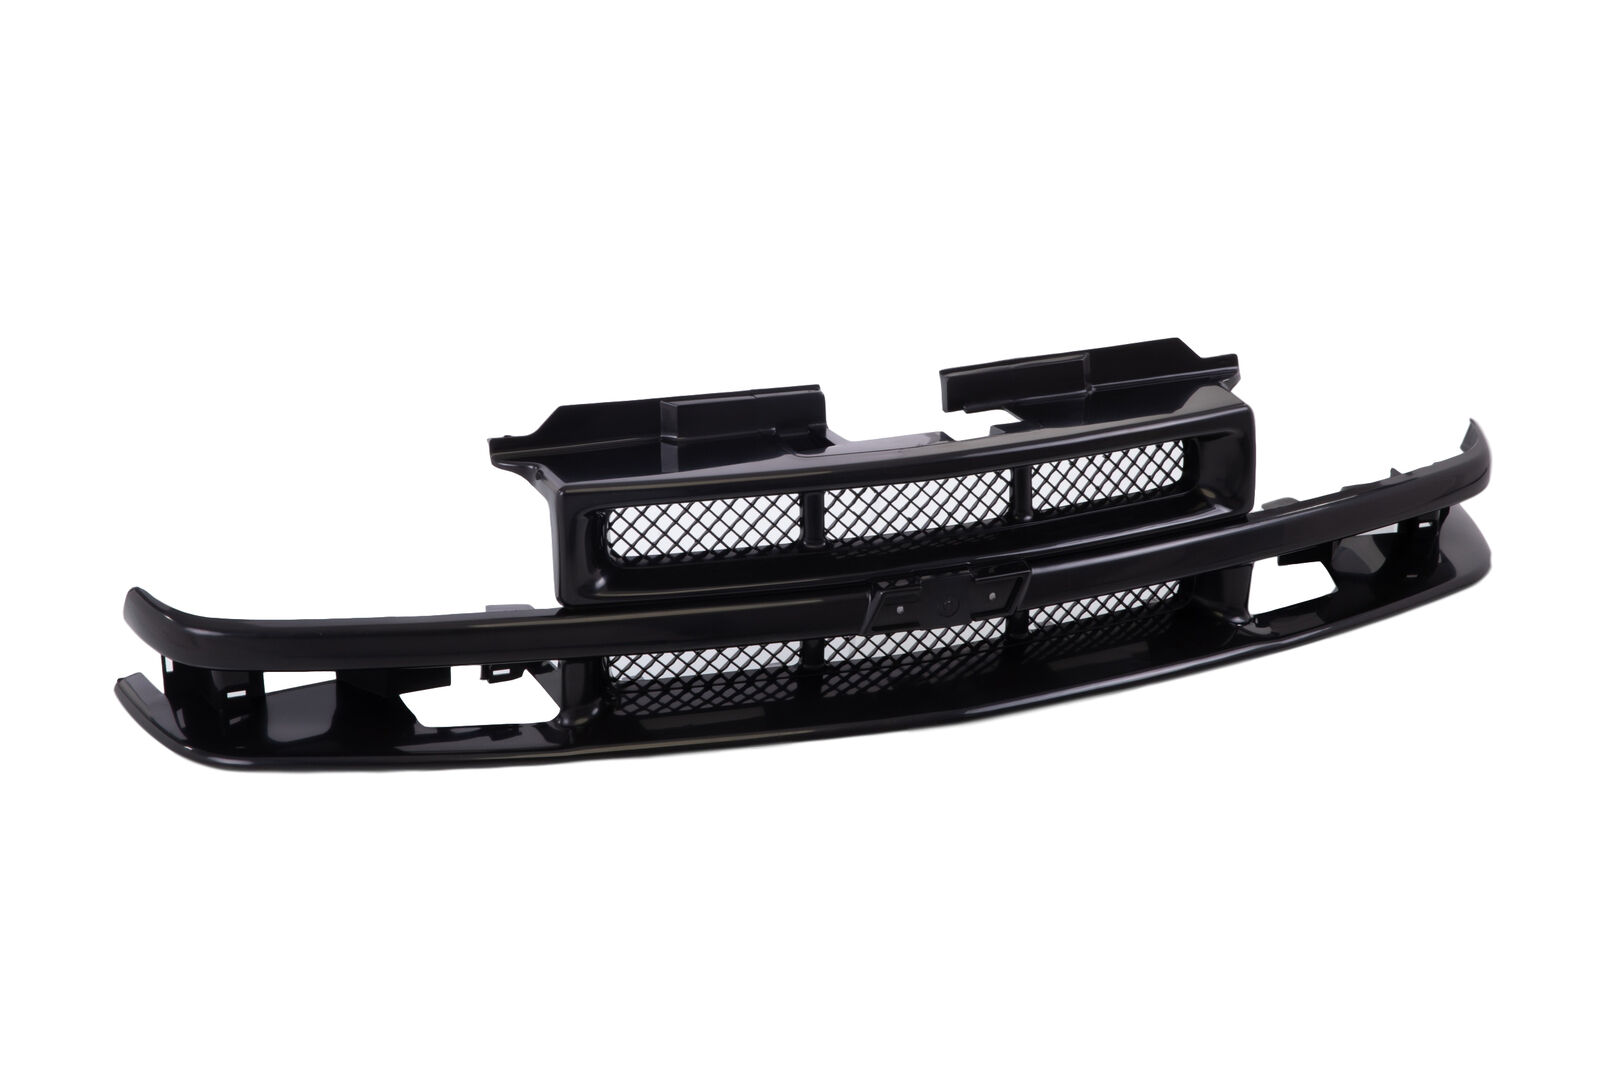 Black Grille With Molding Trim Fits For 98-04 Chevy S10 Blazer Pickup Xtreme